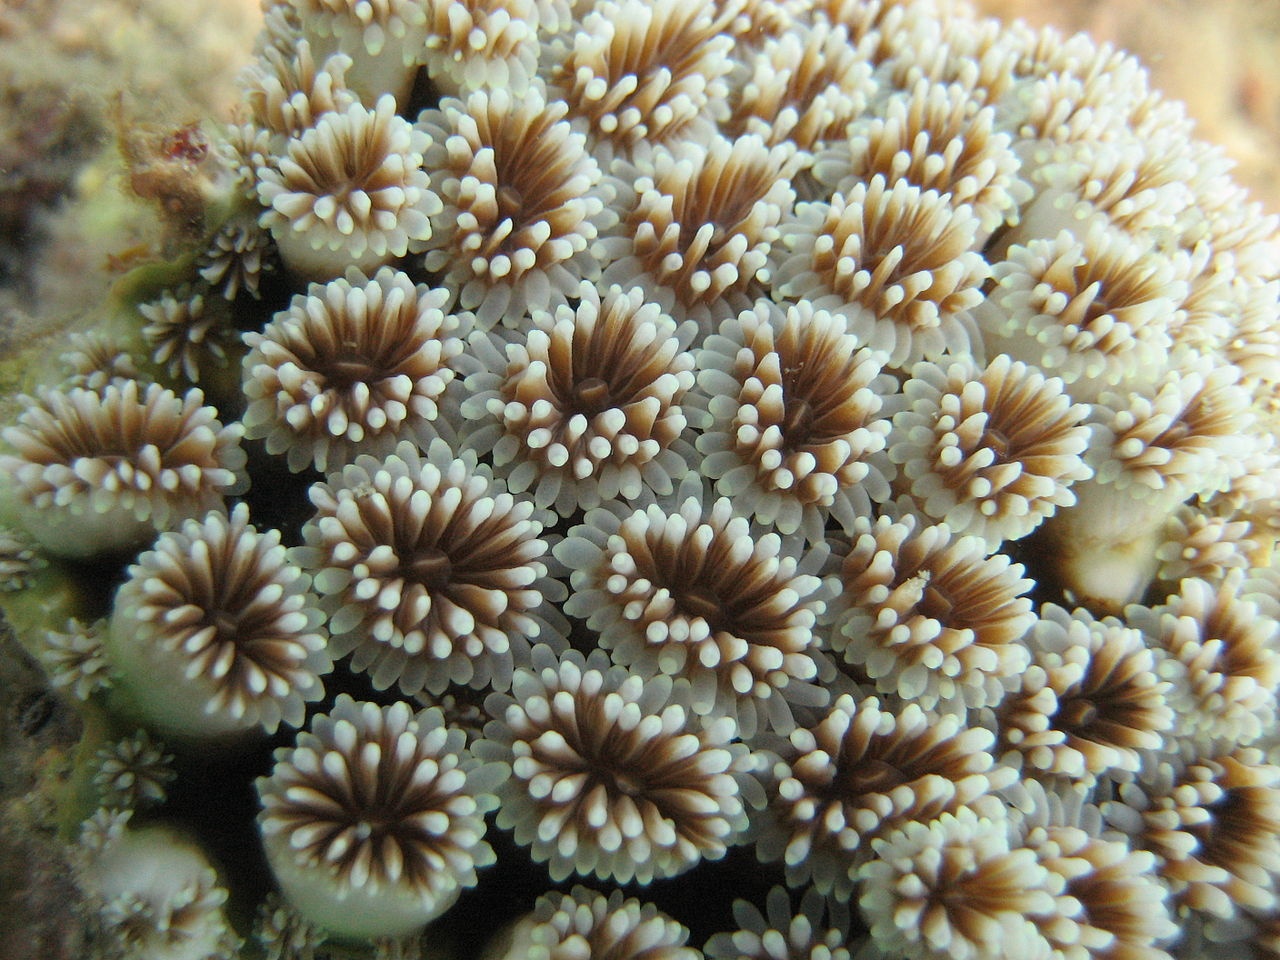 Corail pot de fleur - Goniopora stokesi - <a href='https://commons.wikimedia.org/wiki/File:Coral_detail.jpg' title='via Wikimedia Commons'>pakmat</a> / <a href='https://creativecommons.org/licenses/by-sa/2.0'>CC BY-SA</a> - BioObs